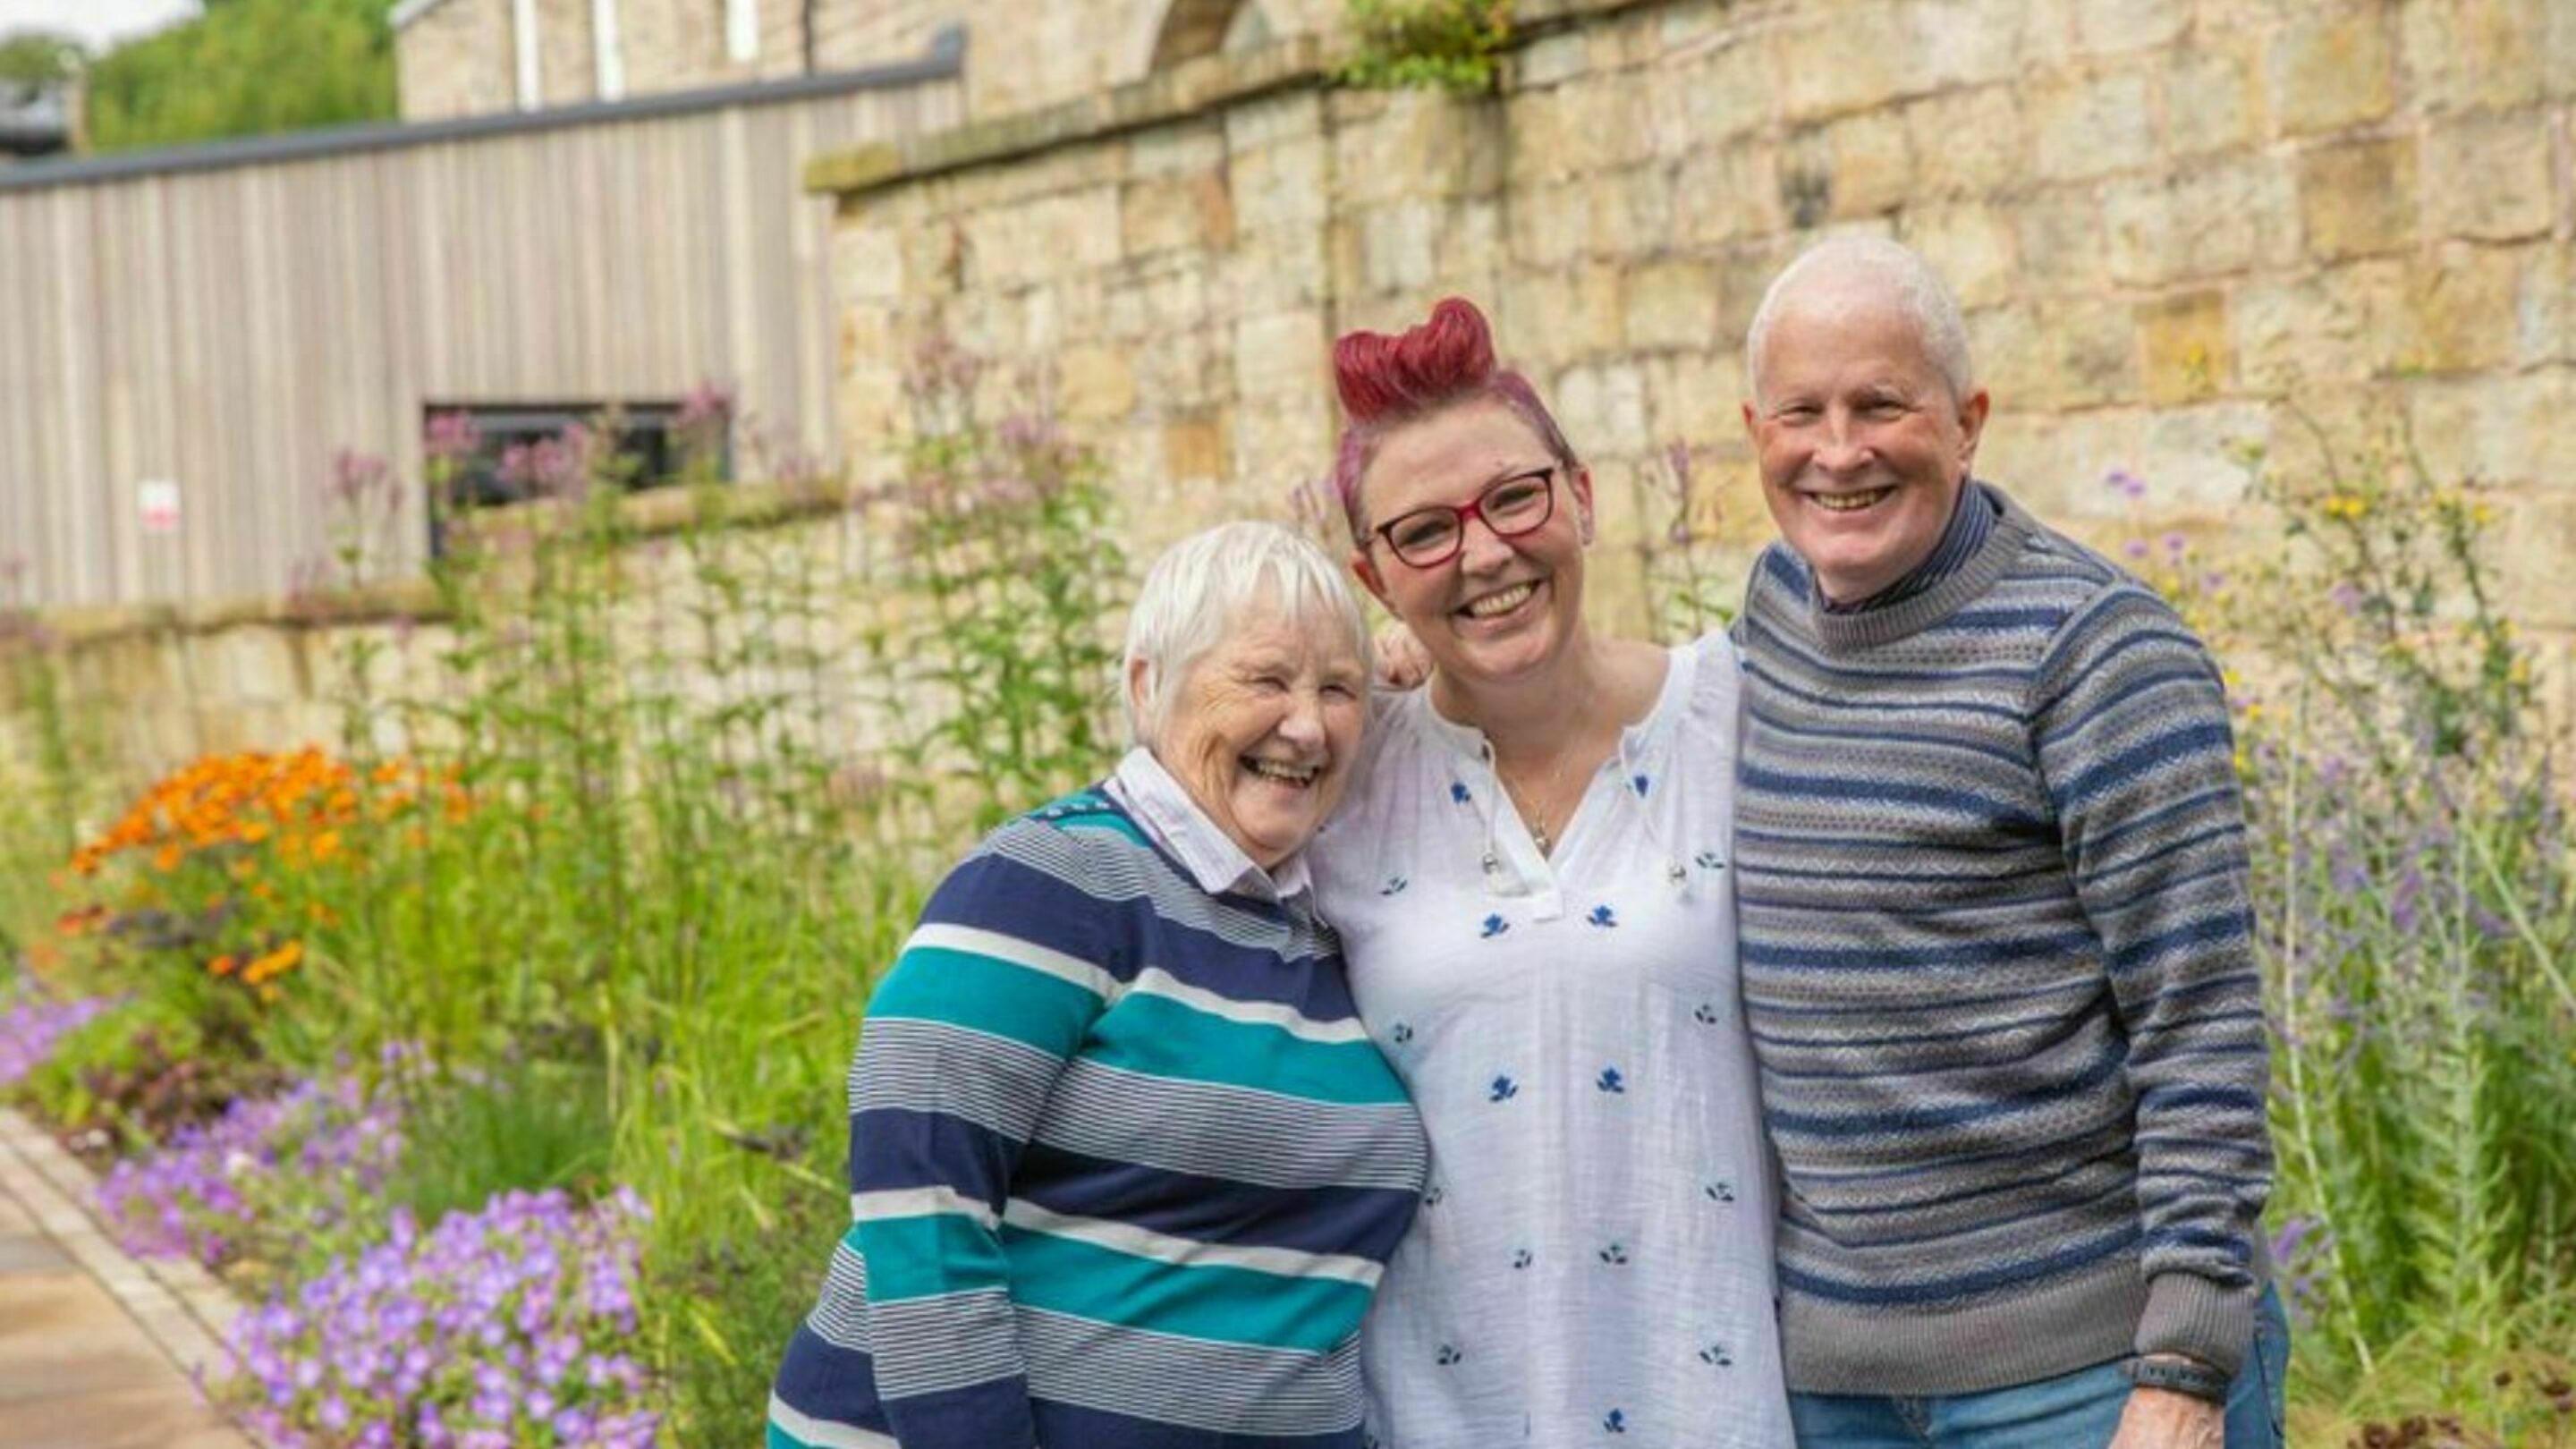 Three people smiling together in a garden. First there's Amanda (centre), former CAP client who became debt free in 2021. She is smiling at the camera. On her left is Mary, and on her right, Malcolm, who were both part of her debt free journey with CAP.